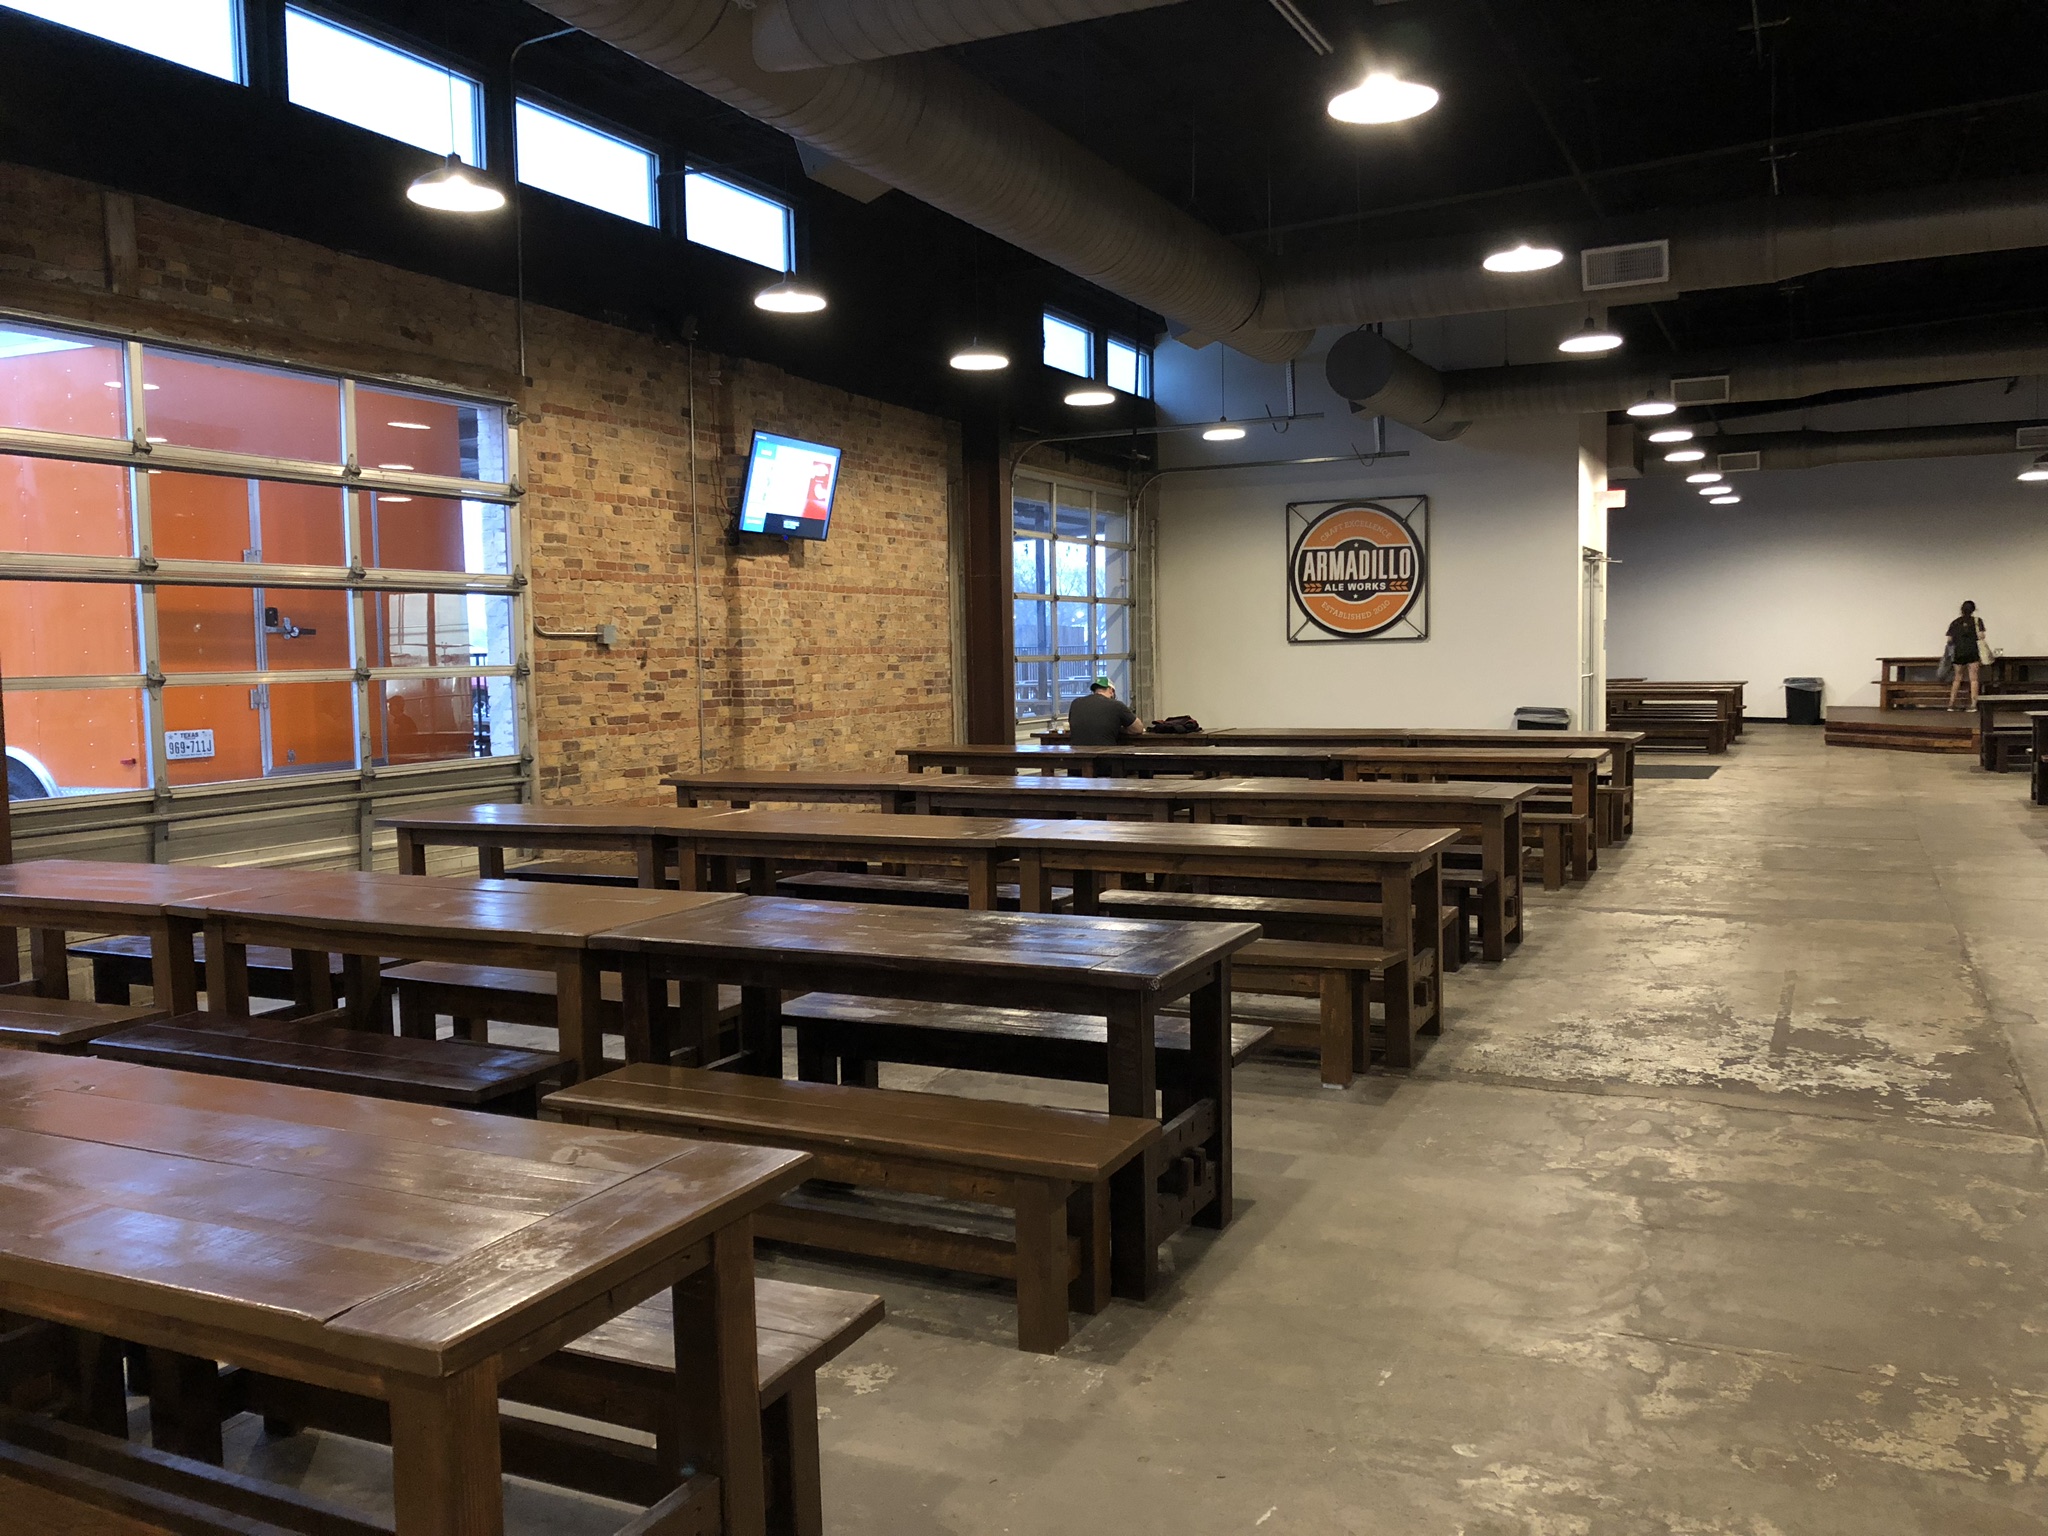 Taproom view from the entrance